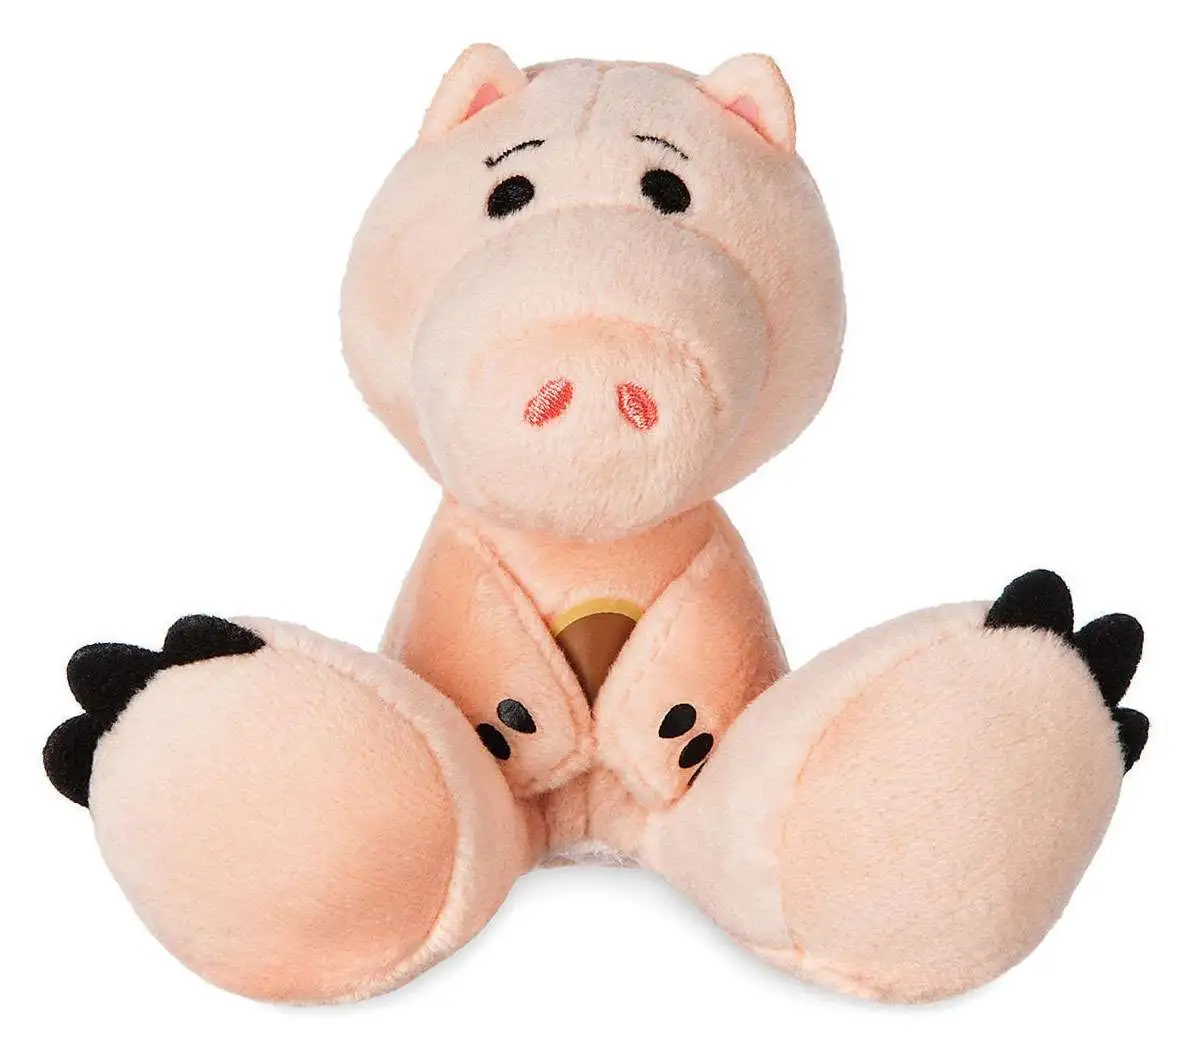 Hamm Bean Bag Plush 7in Toy Story Disney Pig Stuffed Animal Pink for sale online 